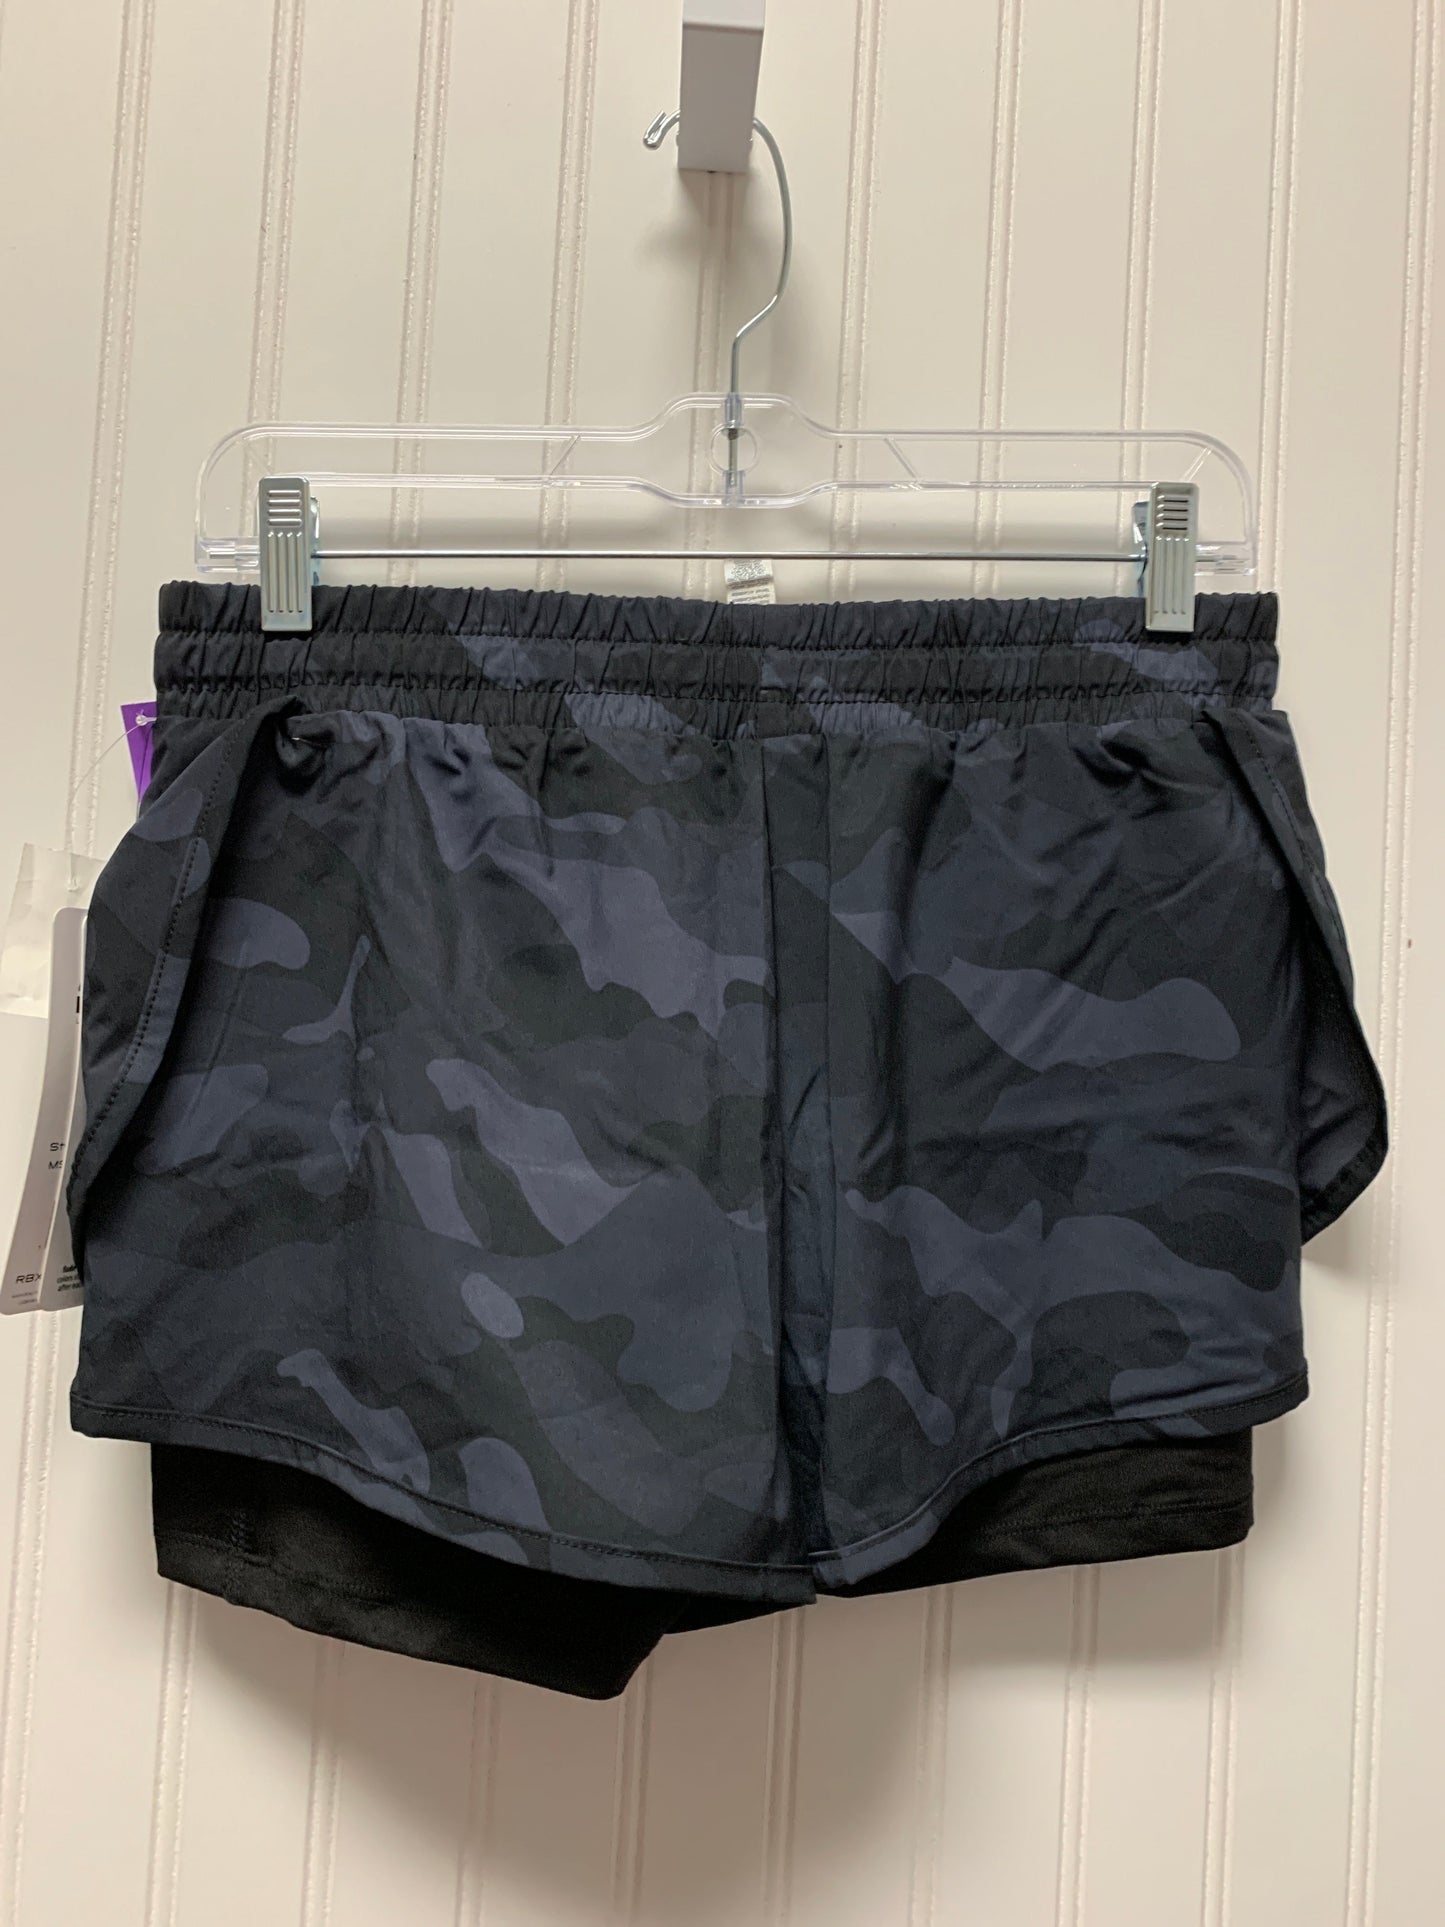 Camouflage Print Athletic Shorts Rbx, Size S